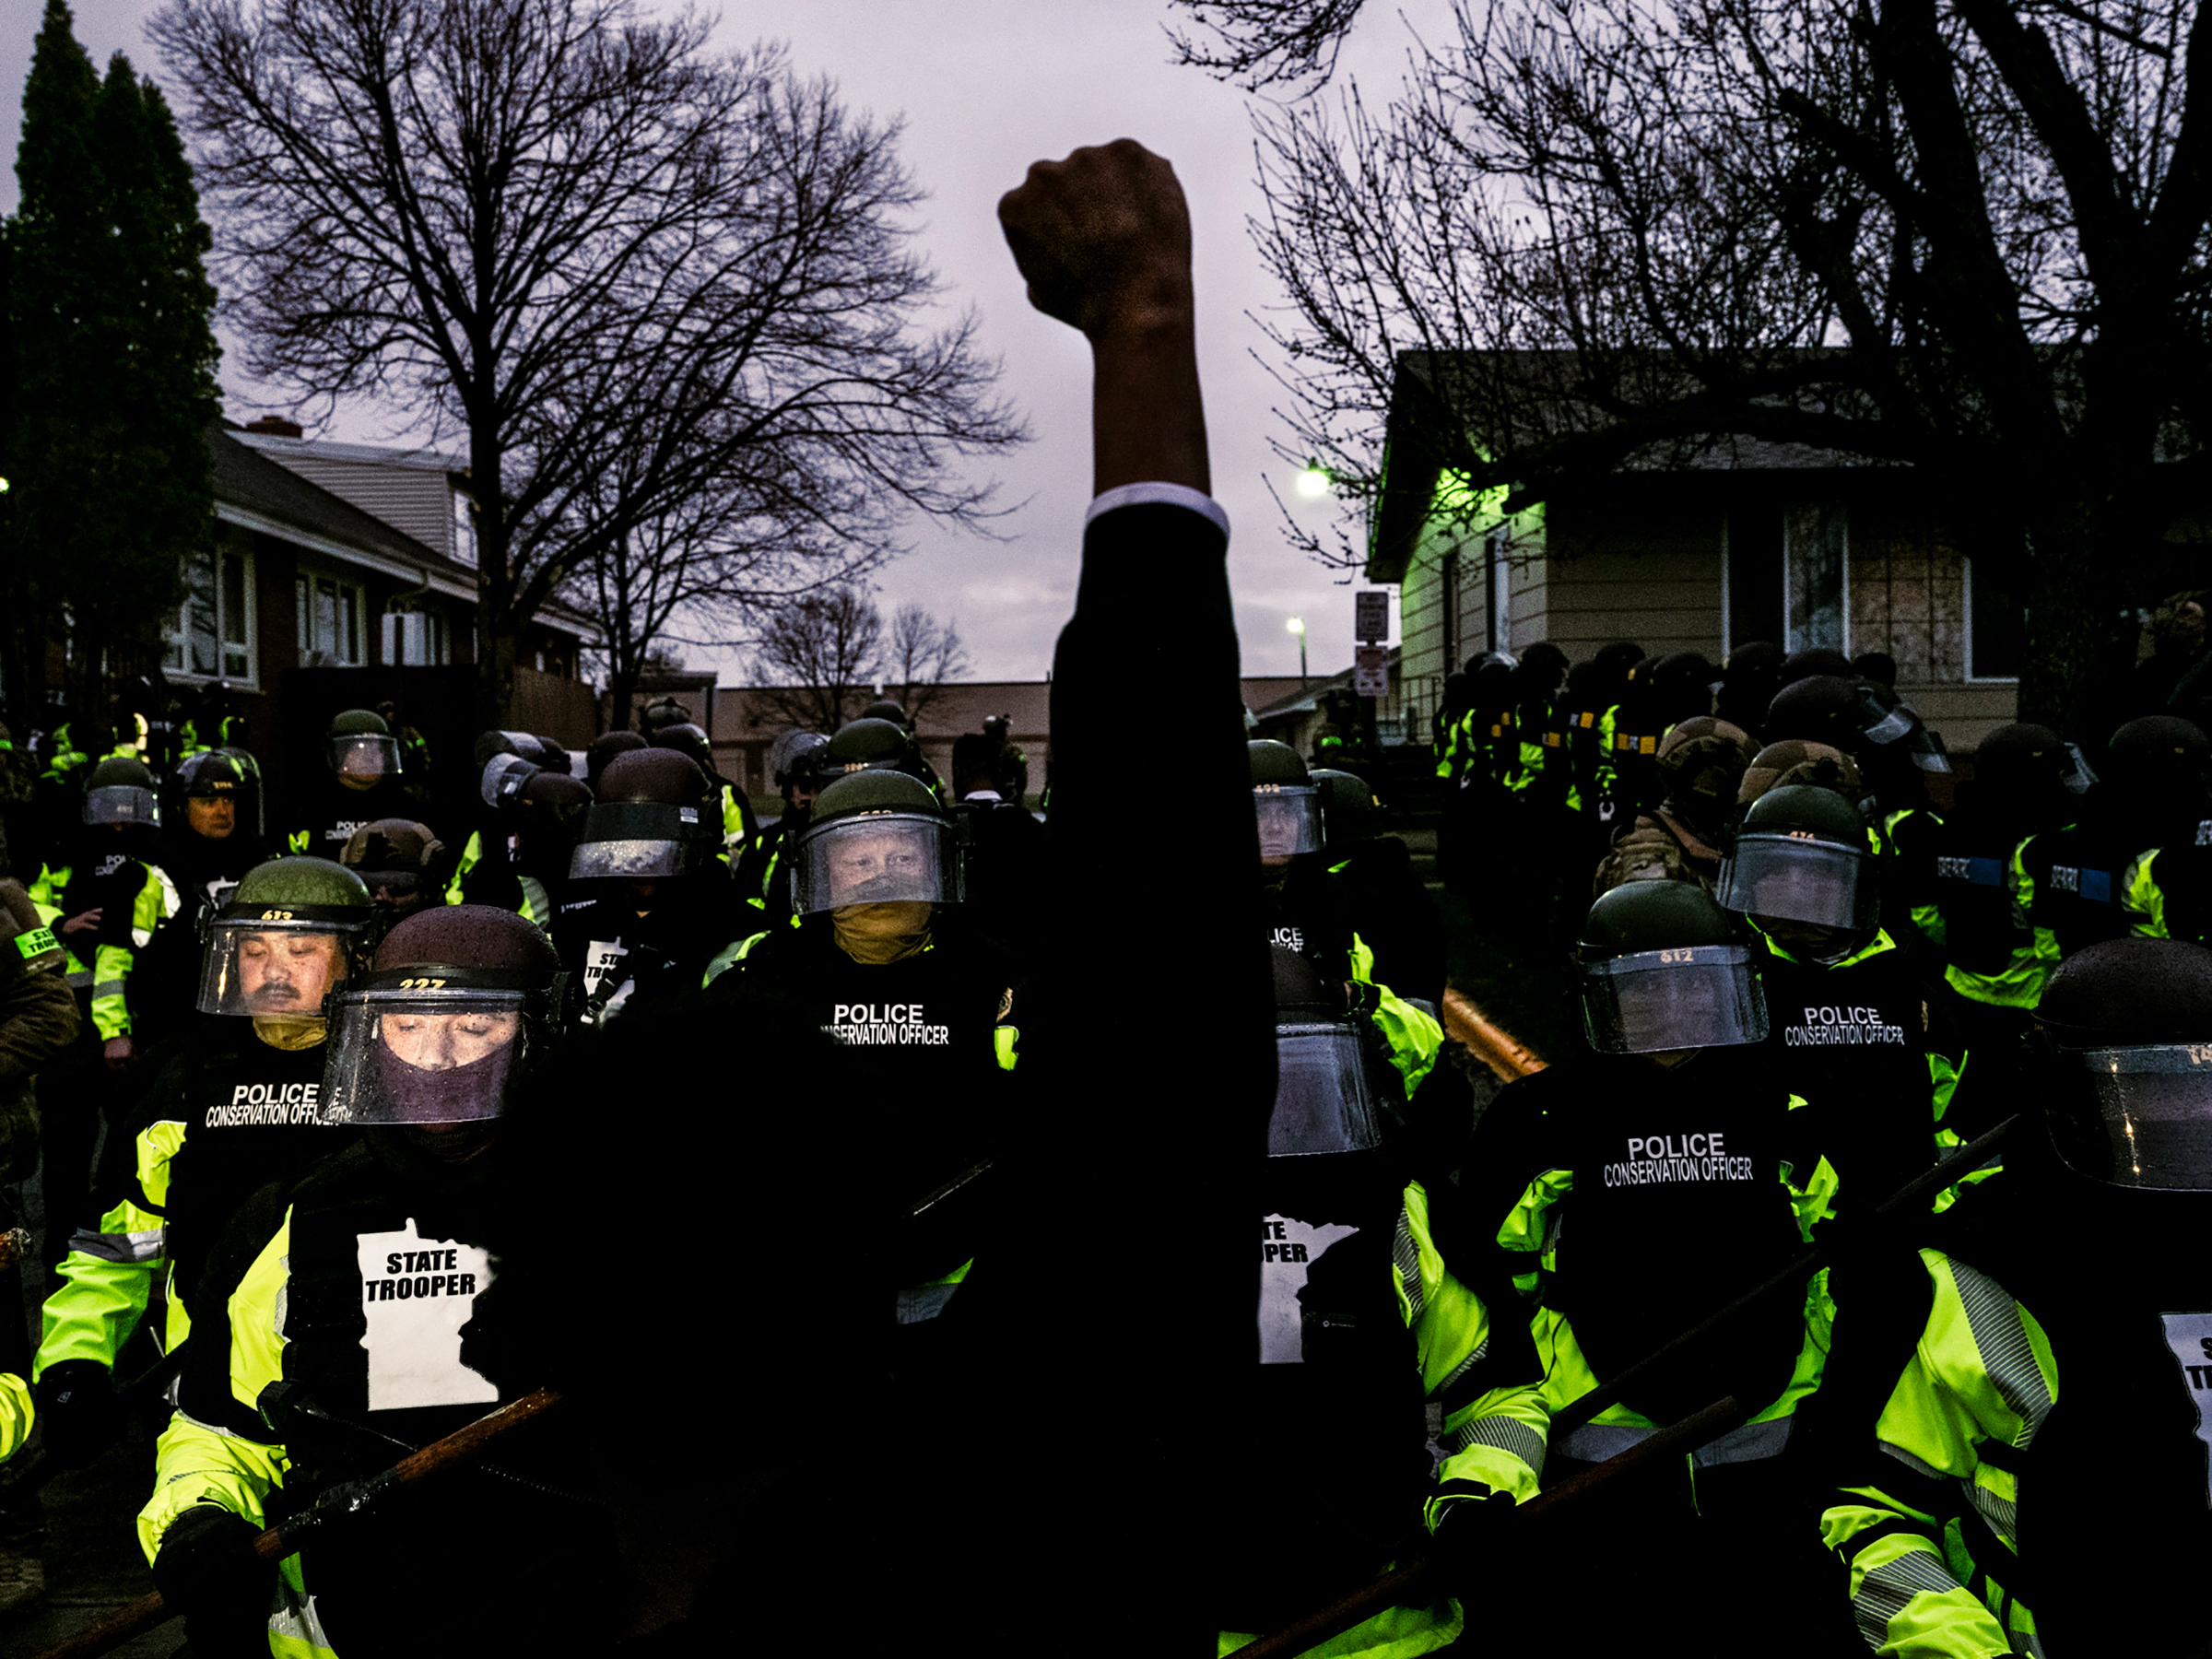 Protesters confront law enforcement officers in Brooklyn Center, Minn., on April 12, one day after 20-year-old Black man Daunte Wright was killed during a traffic stop. (Joshua Rashaad McFadden—The New York Times/Redux)